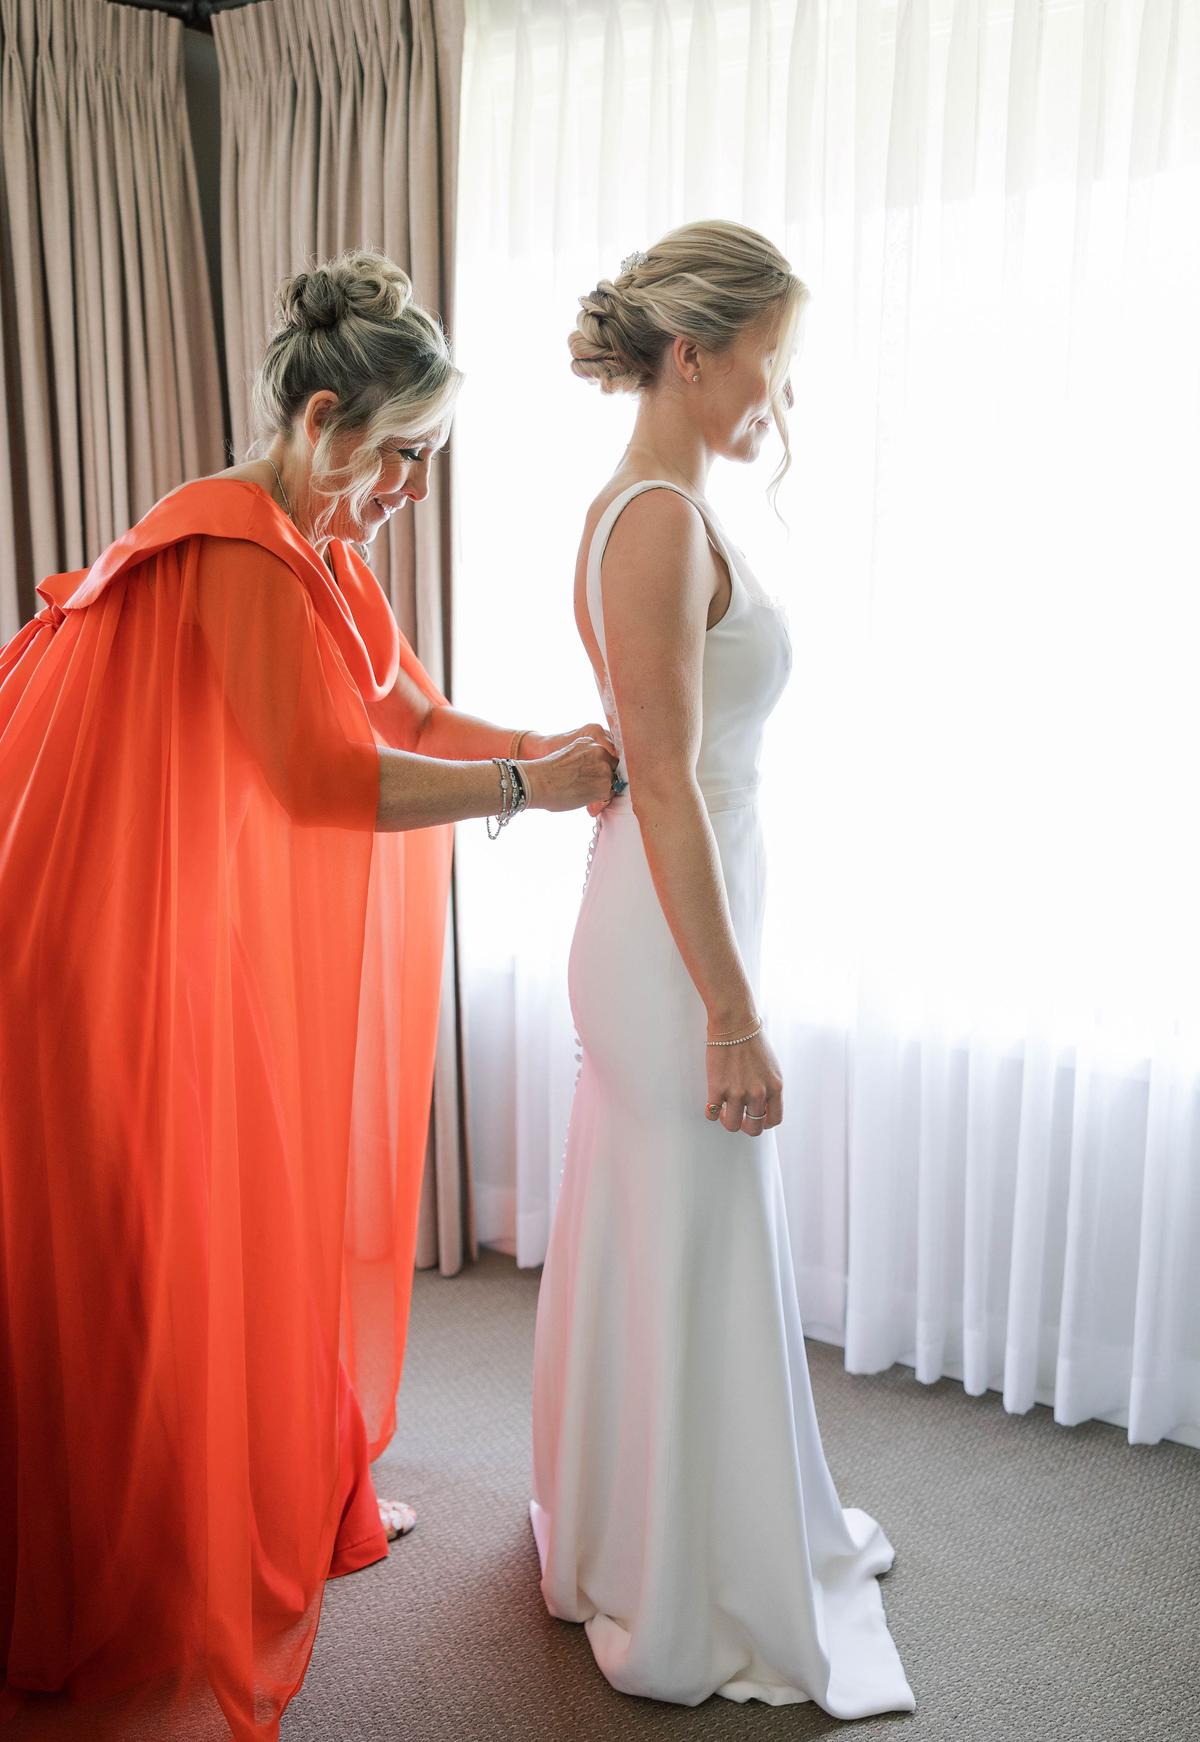  Ms. Wardlaw helped Ms. Fumia with her dress. (Courtesy of <a href="https://www.facebook.com/jessicarice.co">Jessica Rice Photography</a>)